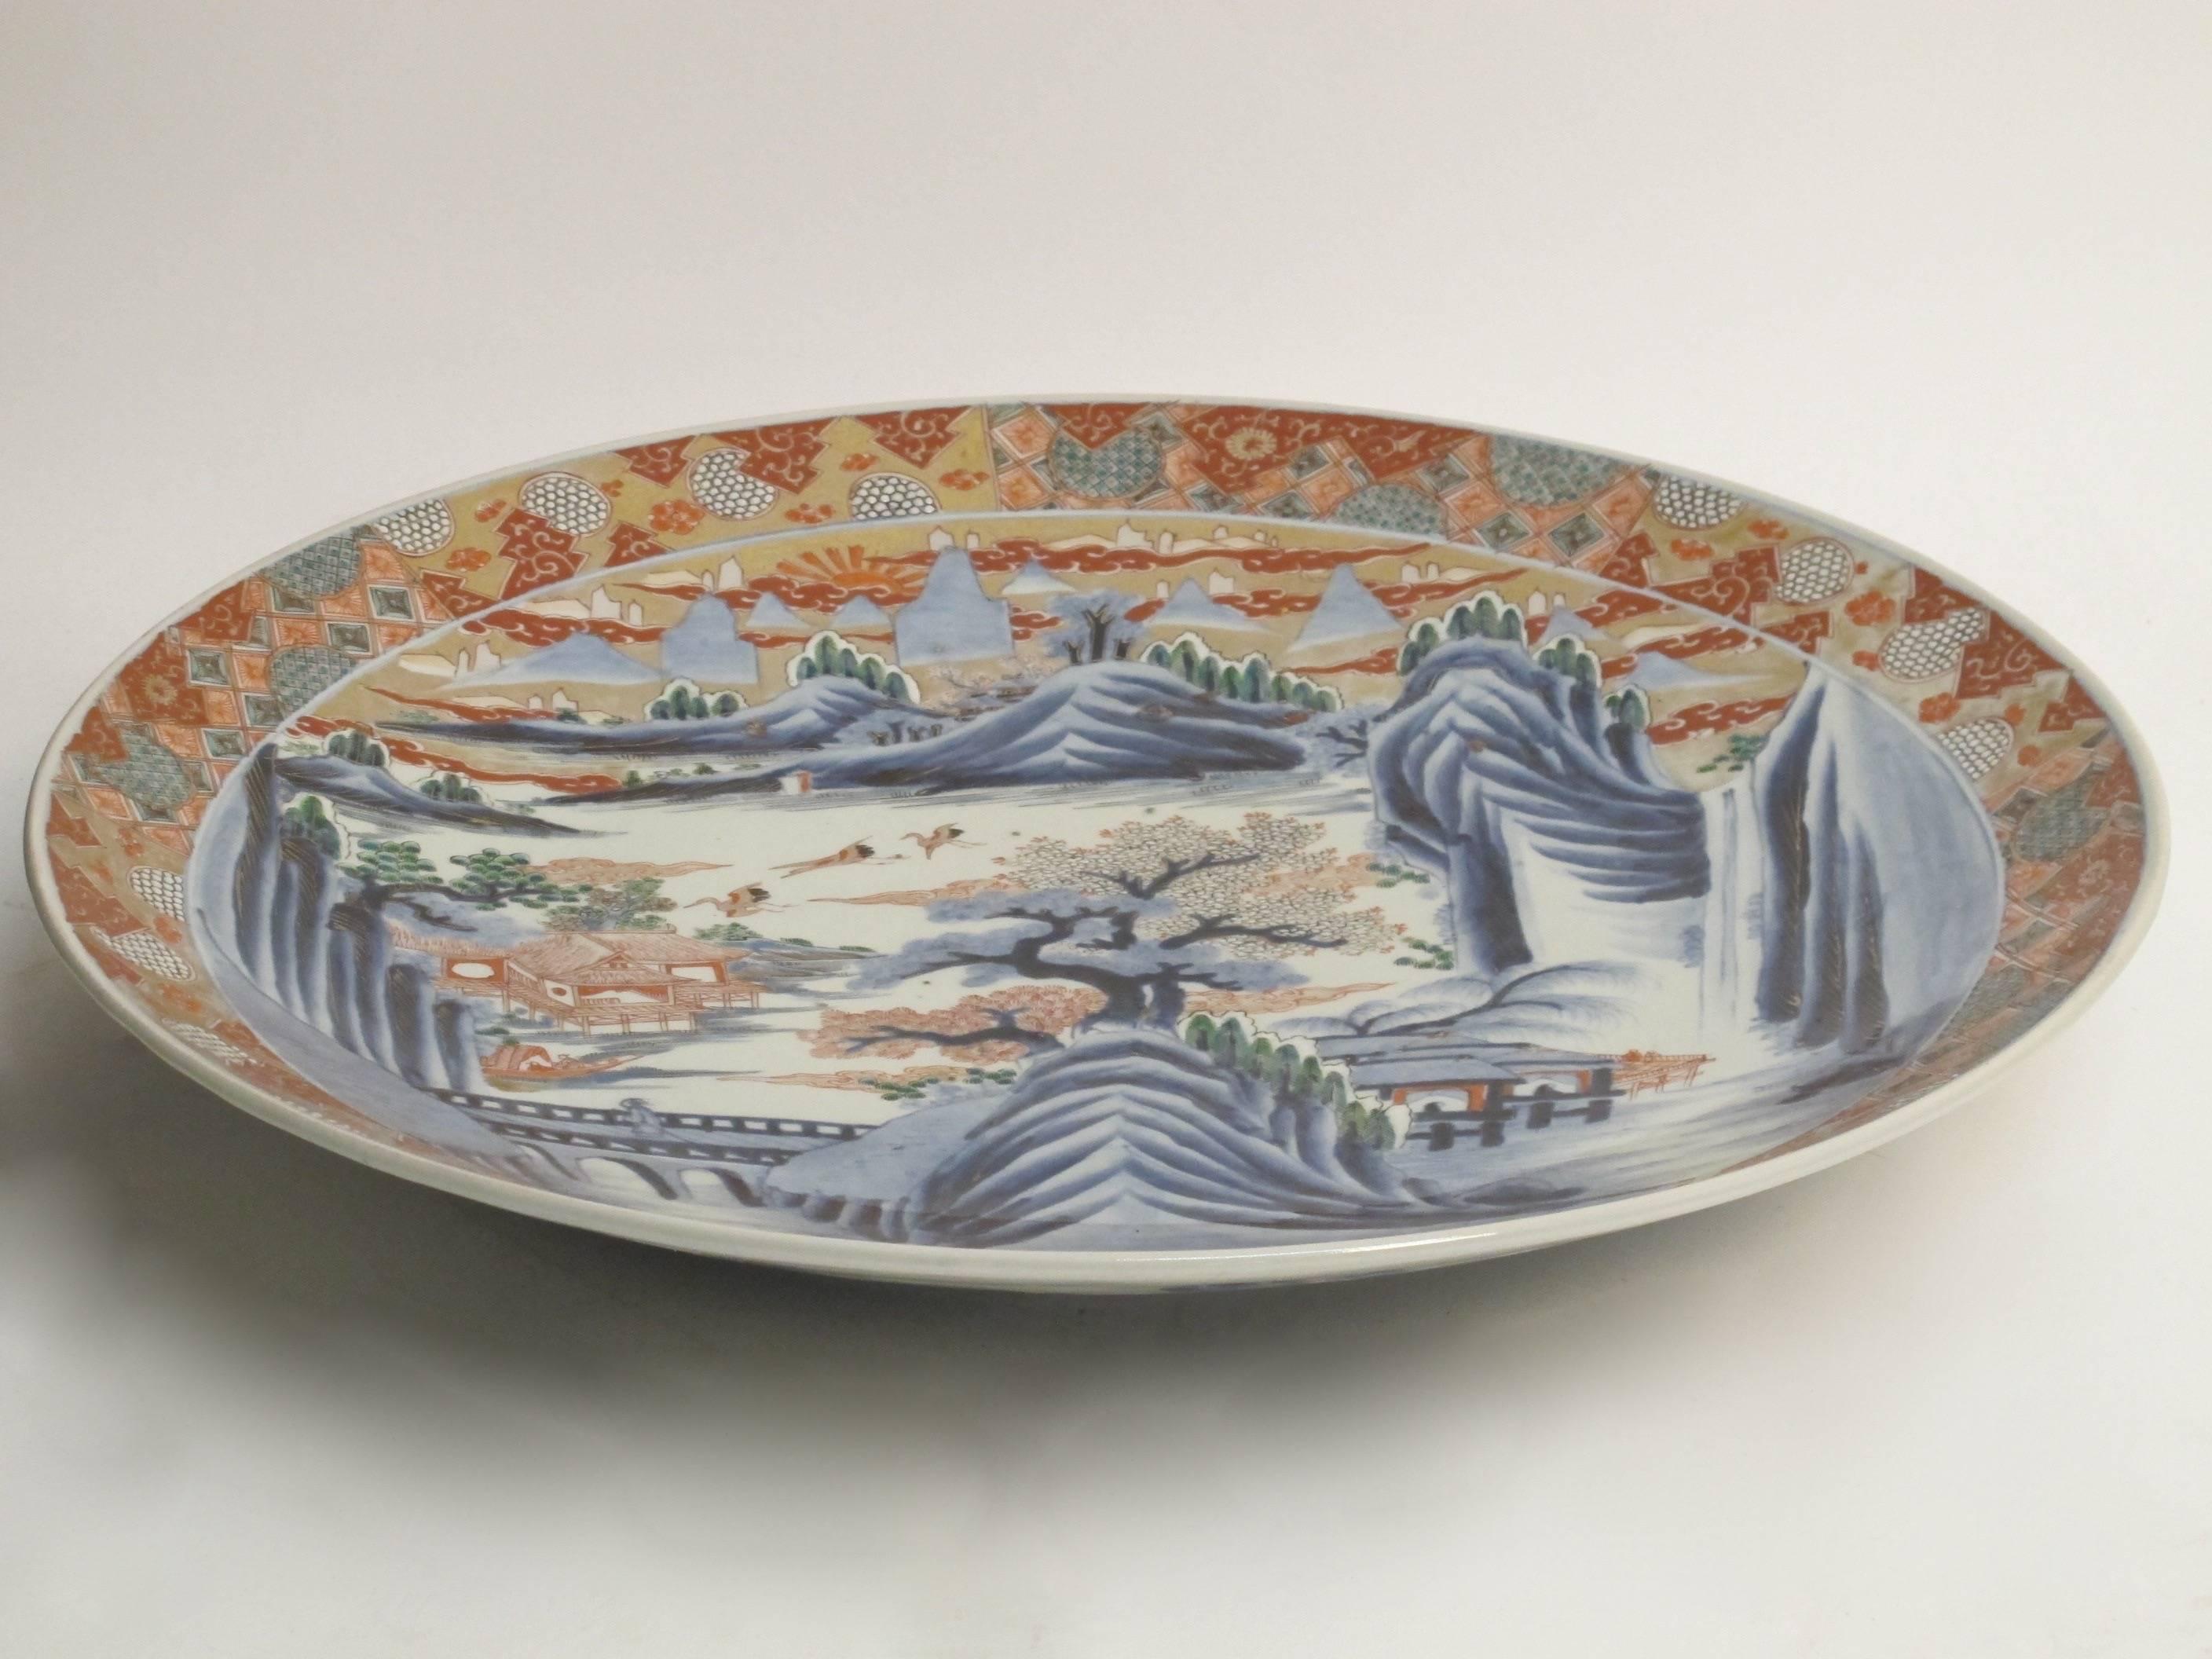 A beautiful and large late 19th century Meiji period hand-painted Imari charger. The charger has one small flaw in the glaze (this is not damage but happened during the firing process, please see the last photo for close-up).